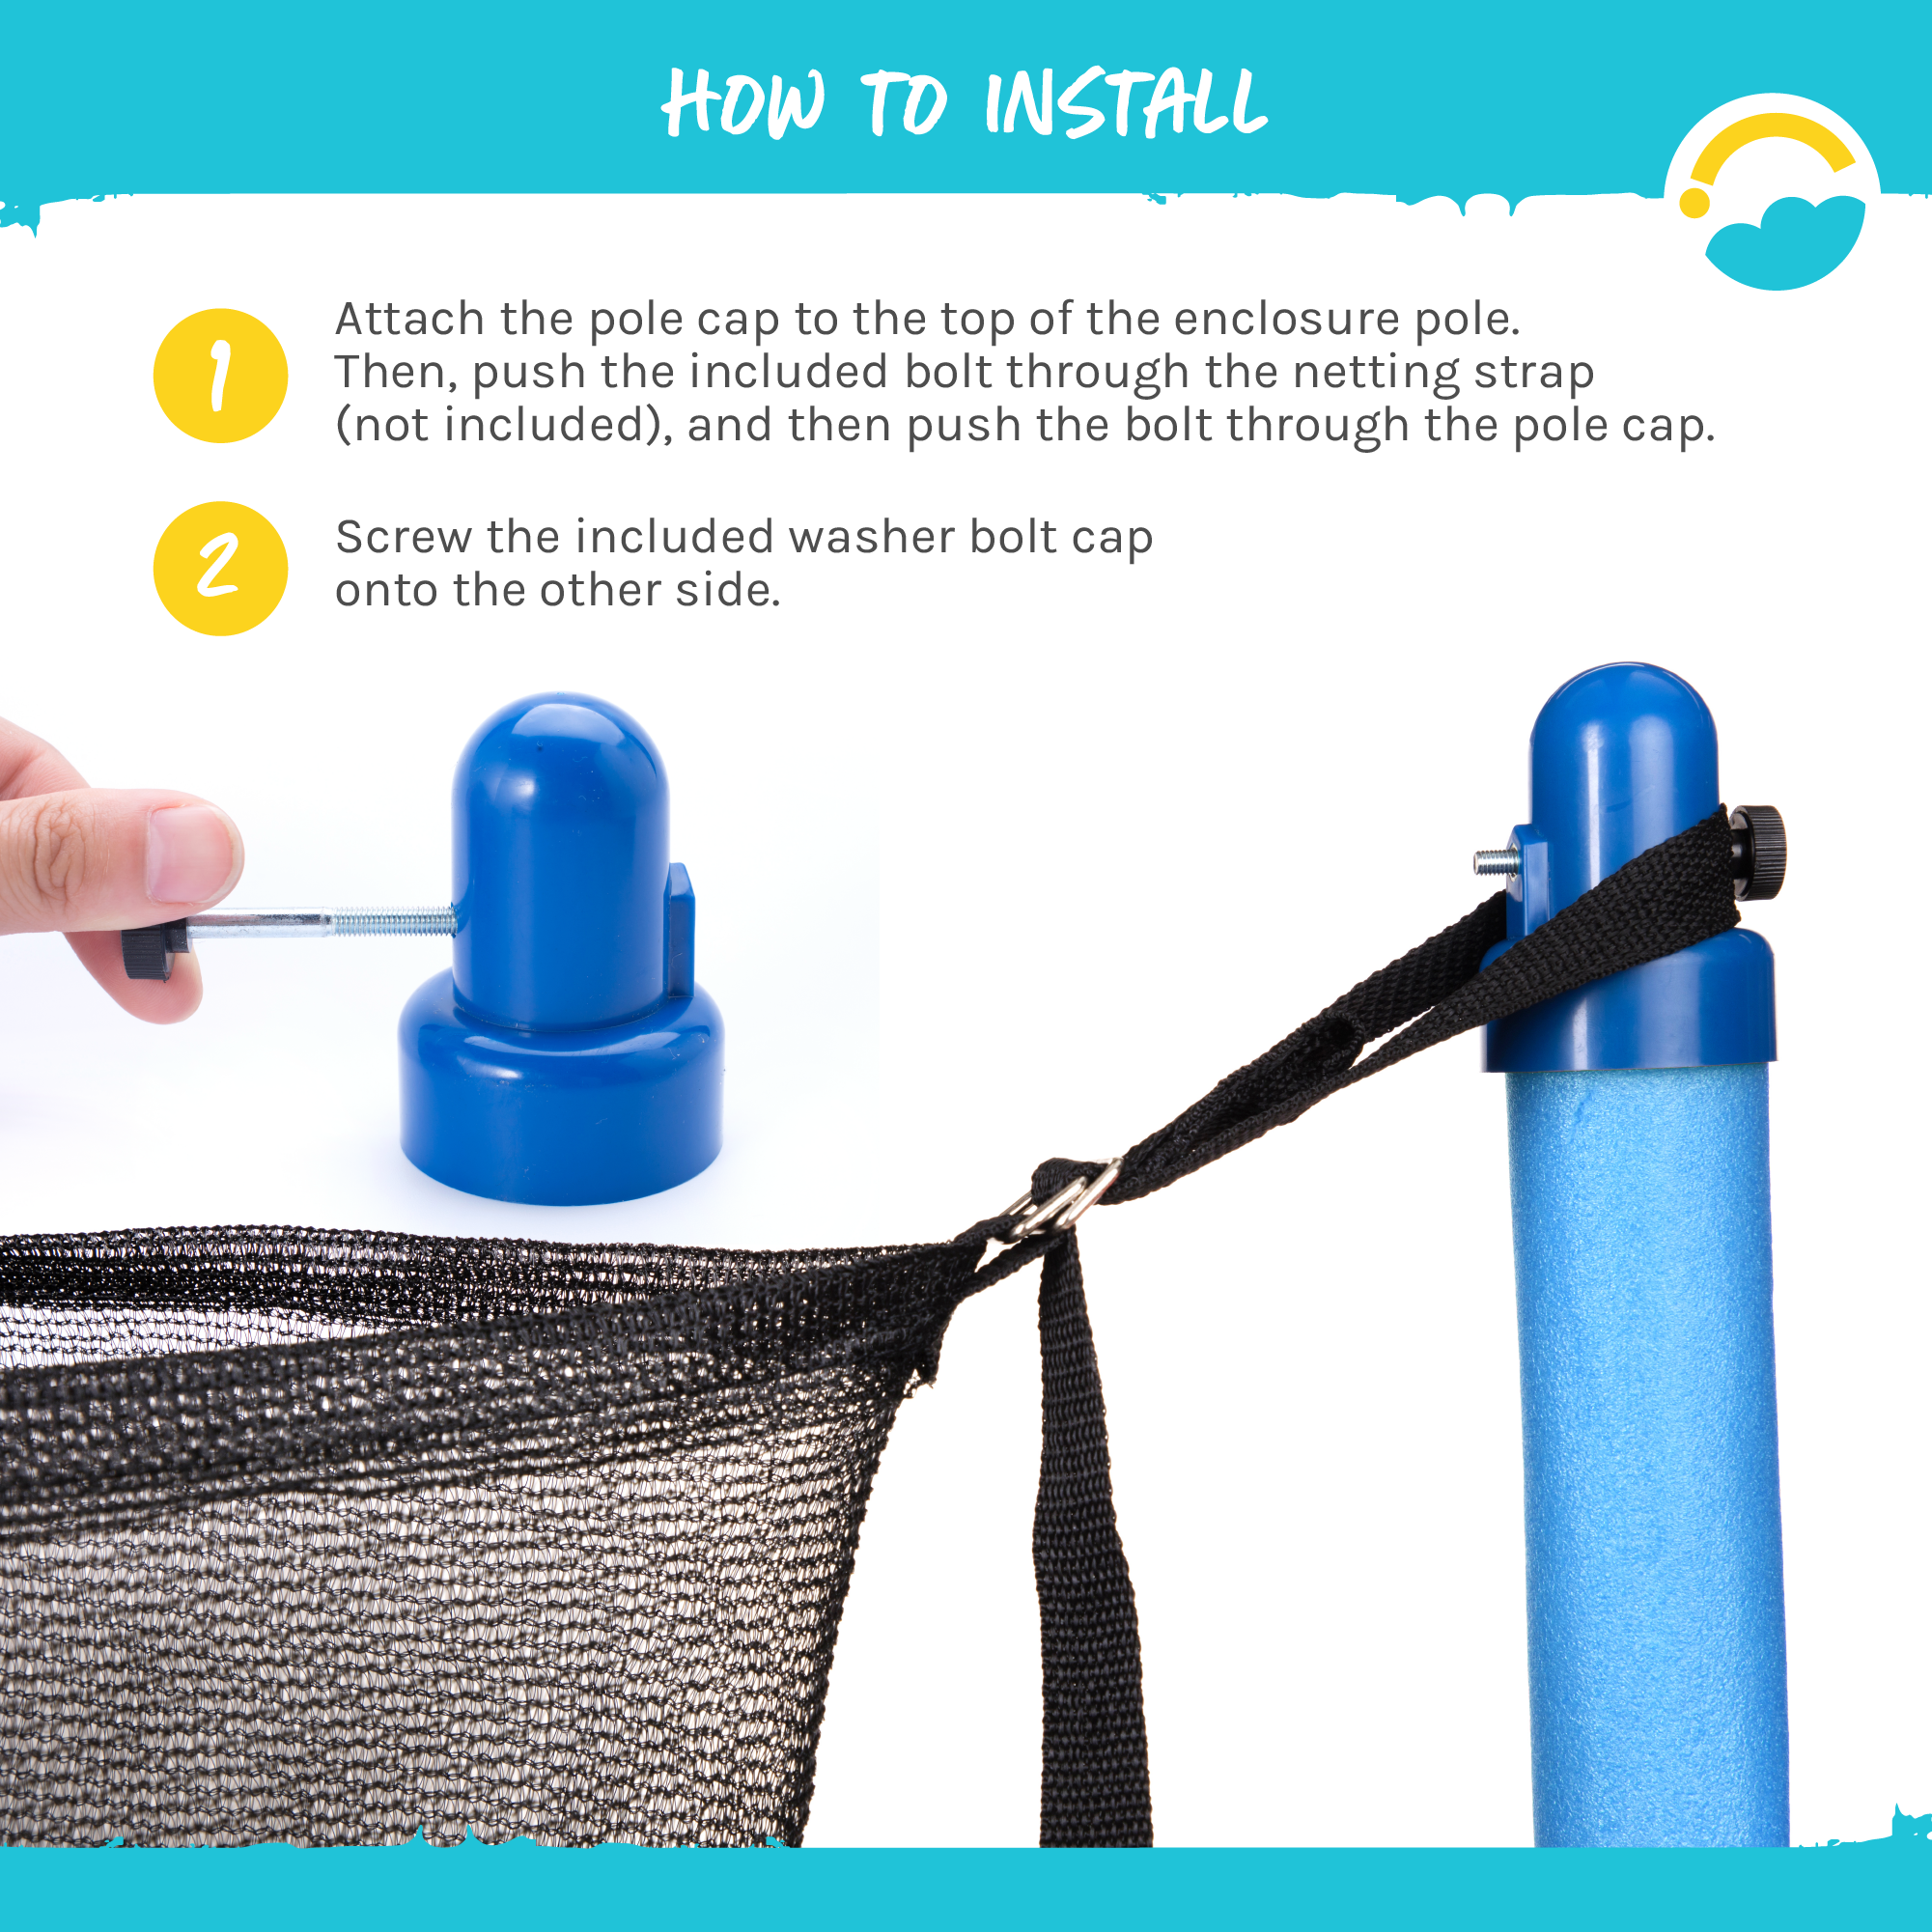 How to Install:  1-Attach the pole caps to the top of the enclosure pole.  Then, push the included bolt through the netting strap (not included), and then push the bolt through the pole cap.  2-Screw the included washer bolt cap unto the other side.  